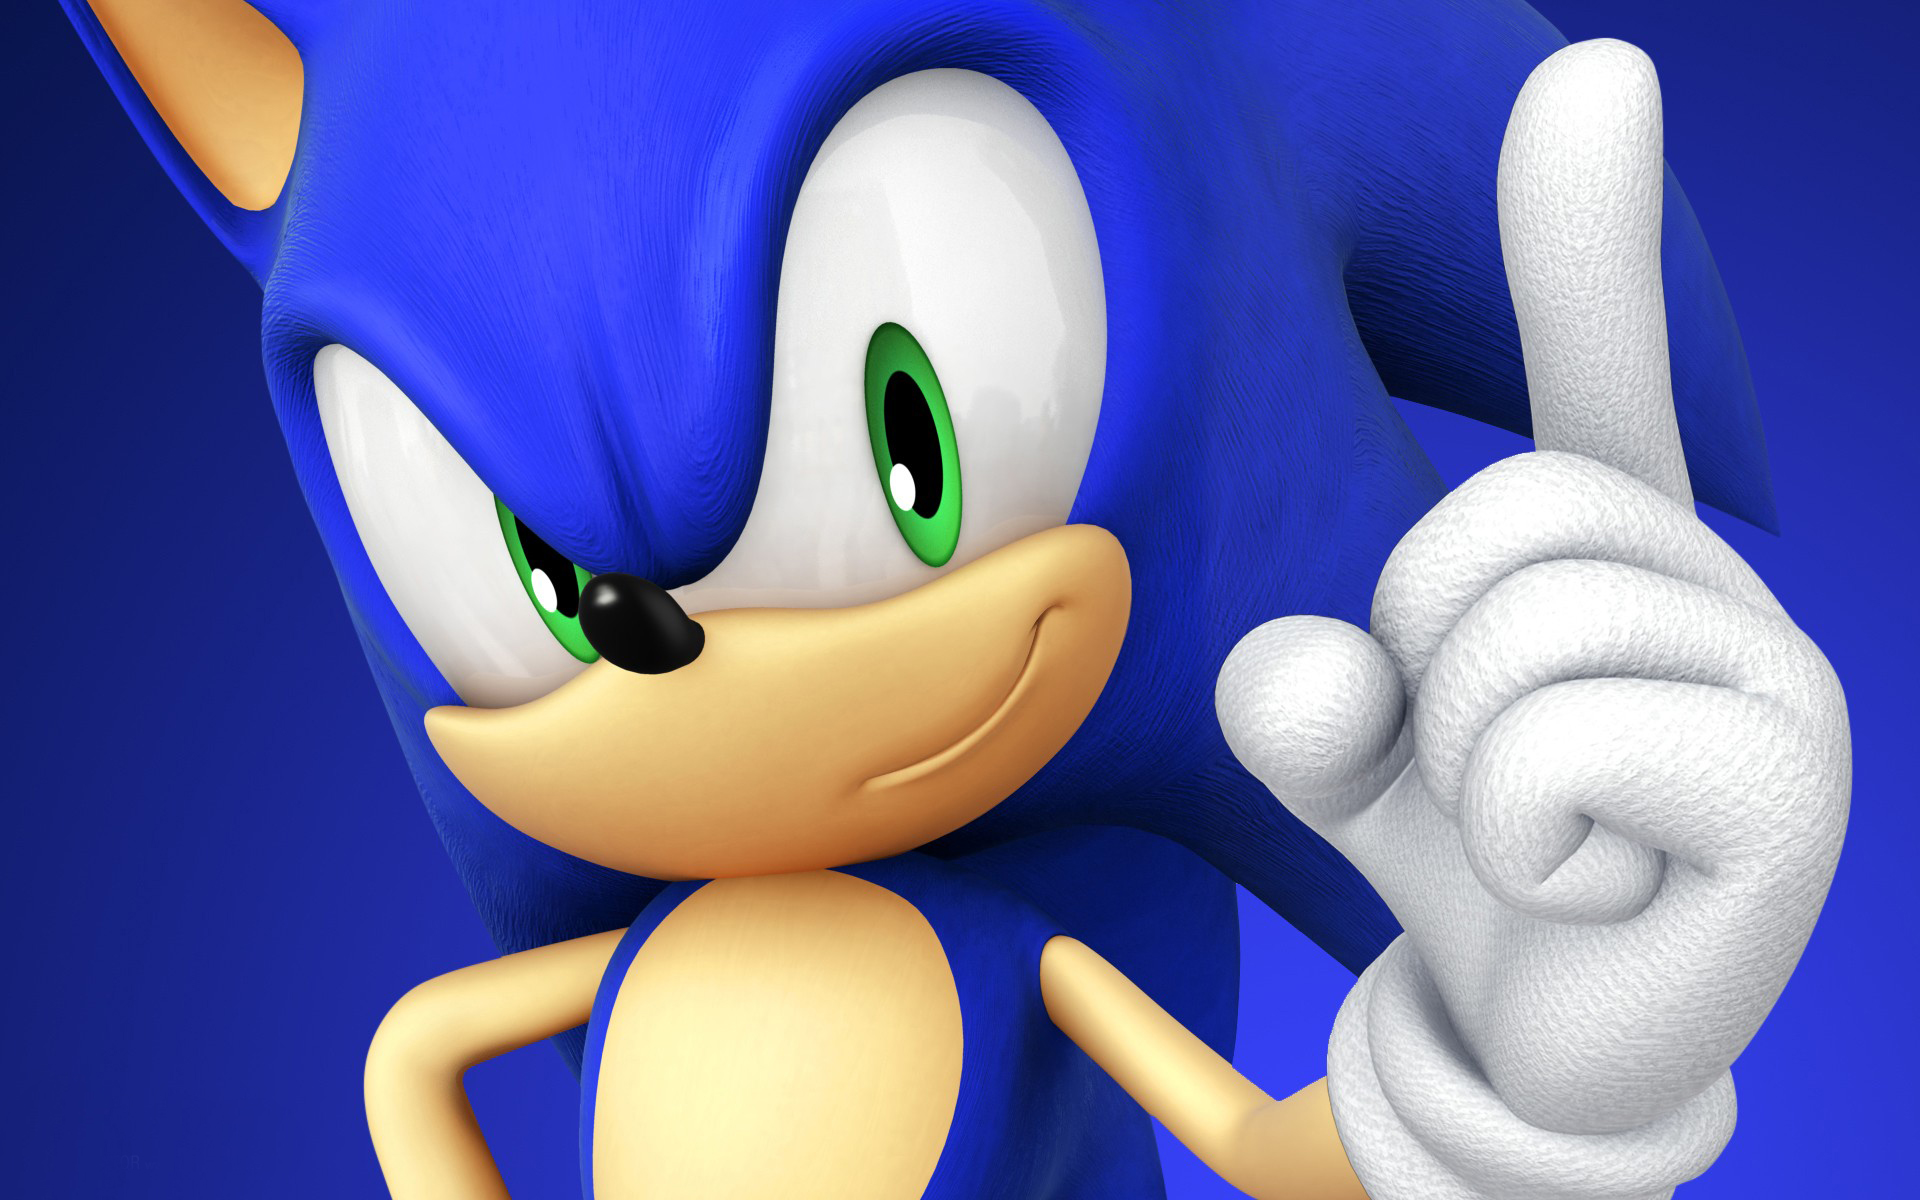 Sonic HD Wallpapers Backgrounds